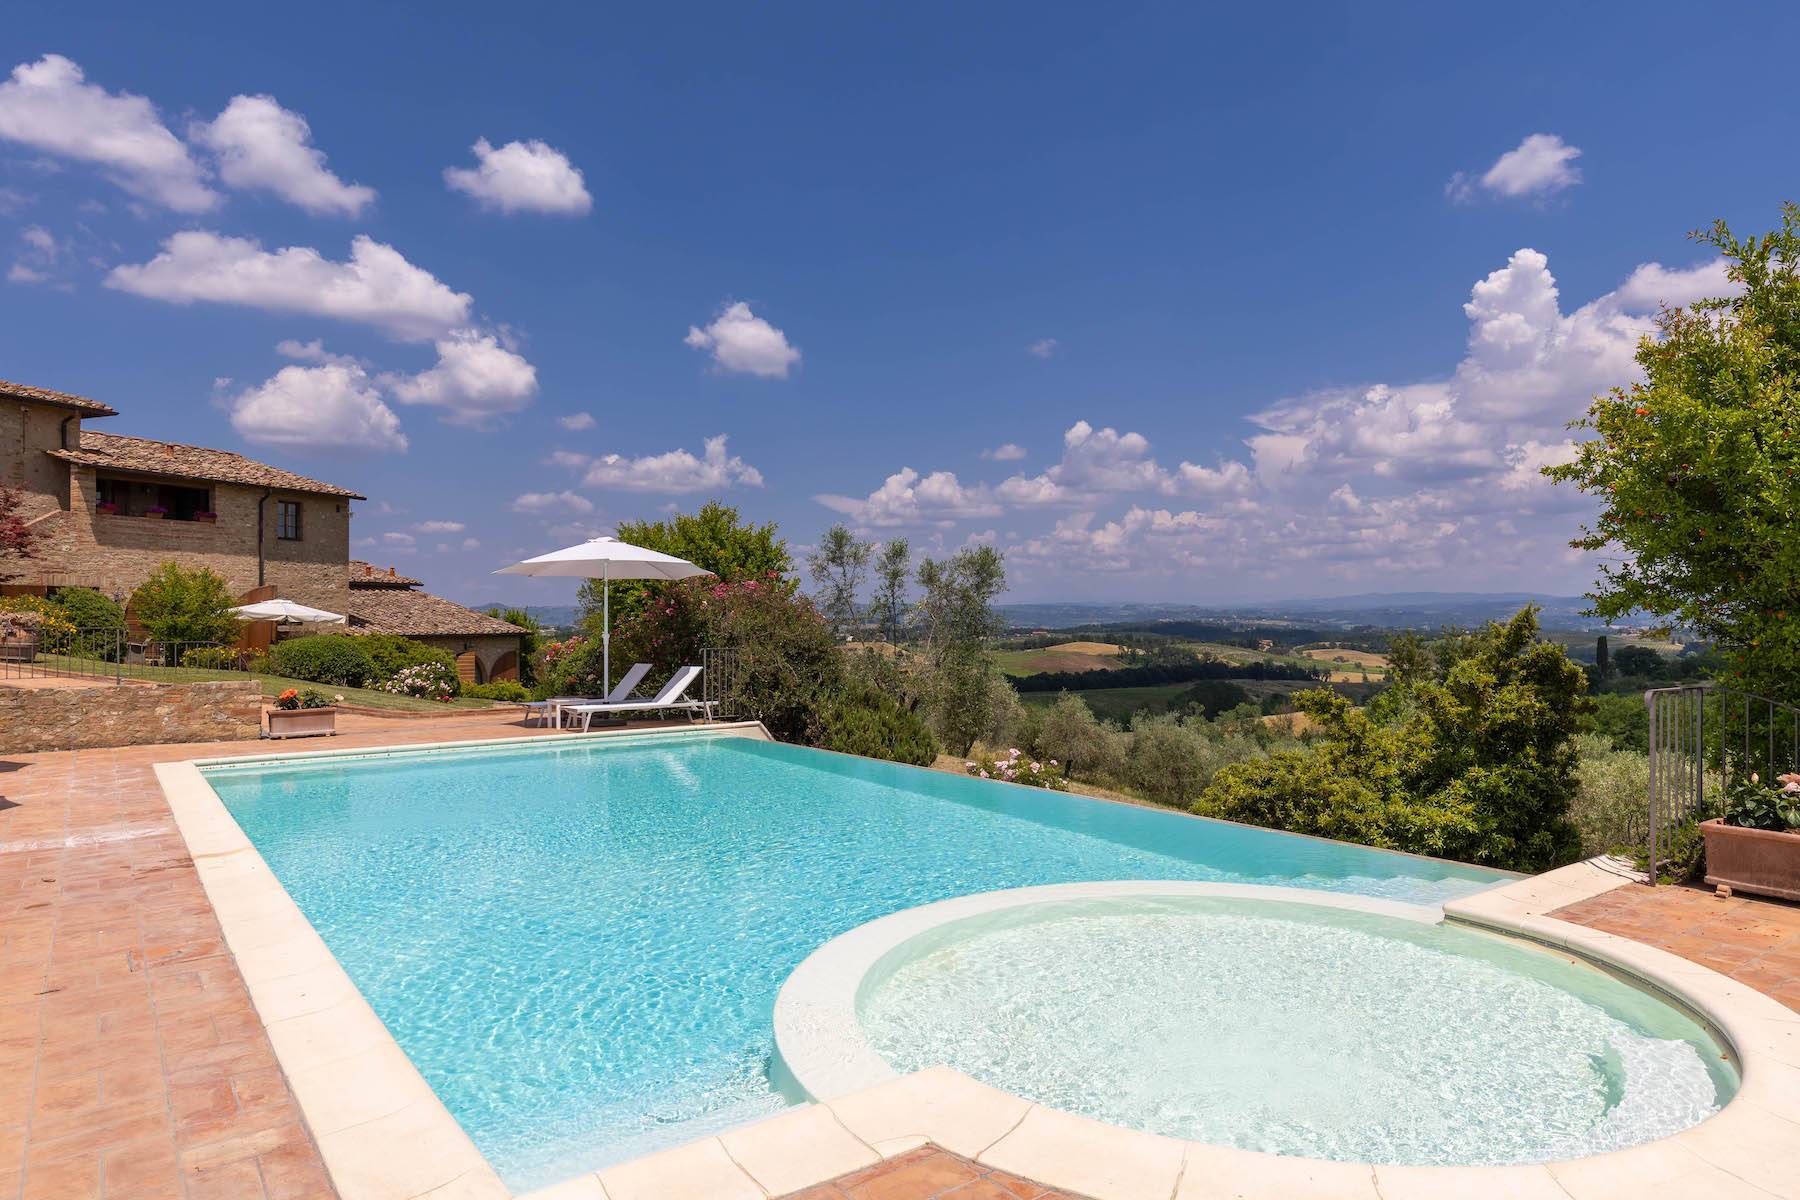 Winery with ancient country house in San gimignano